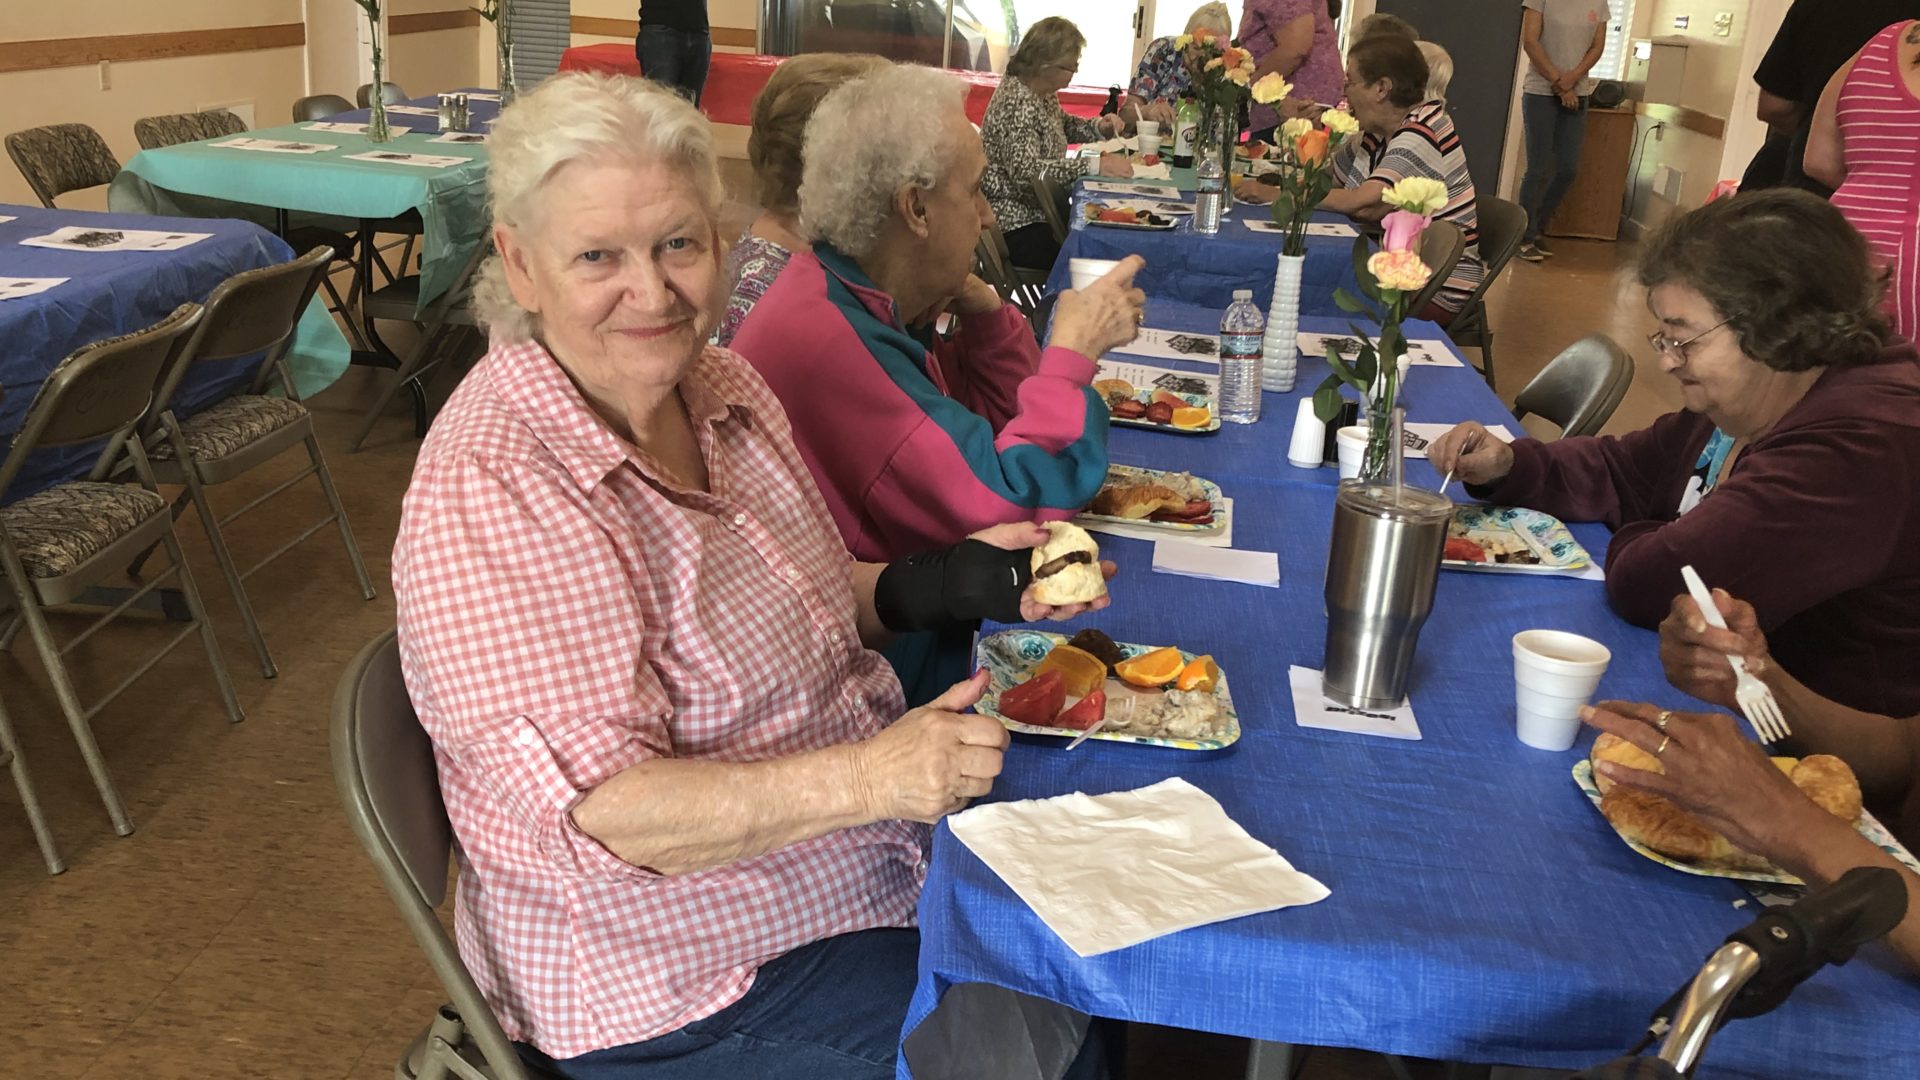 Residents eat brunch during an event at Crozet Meadows